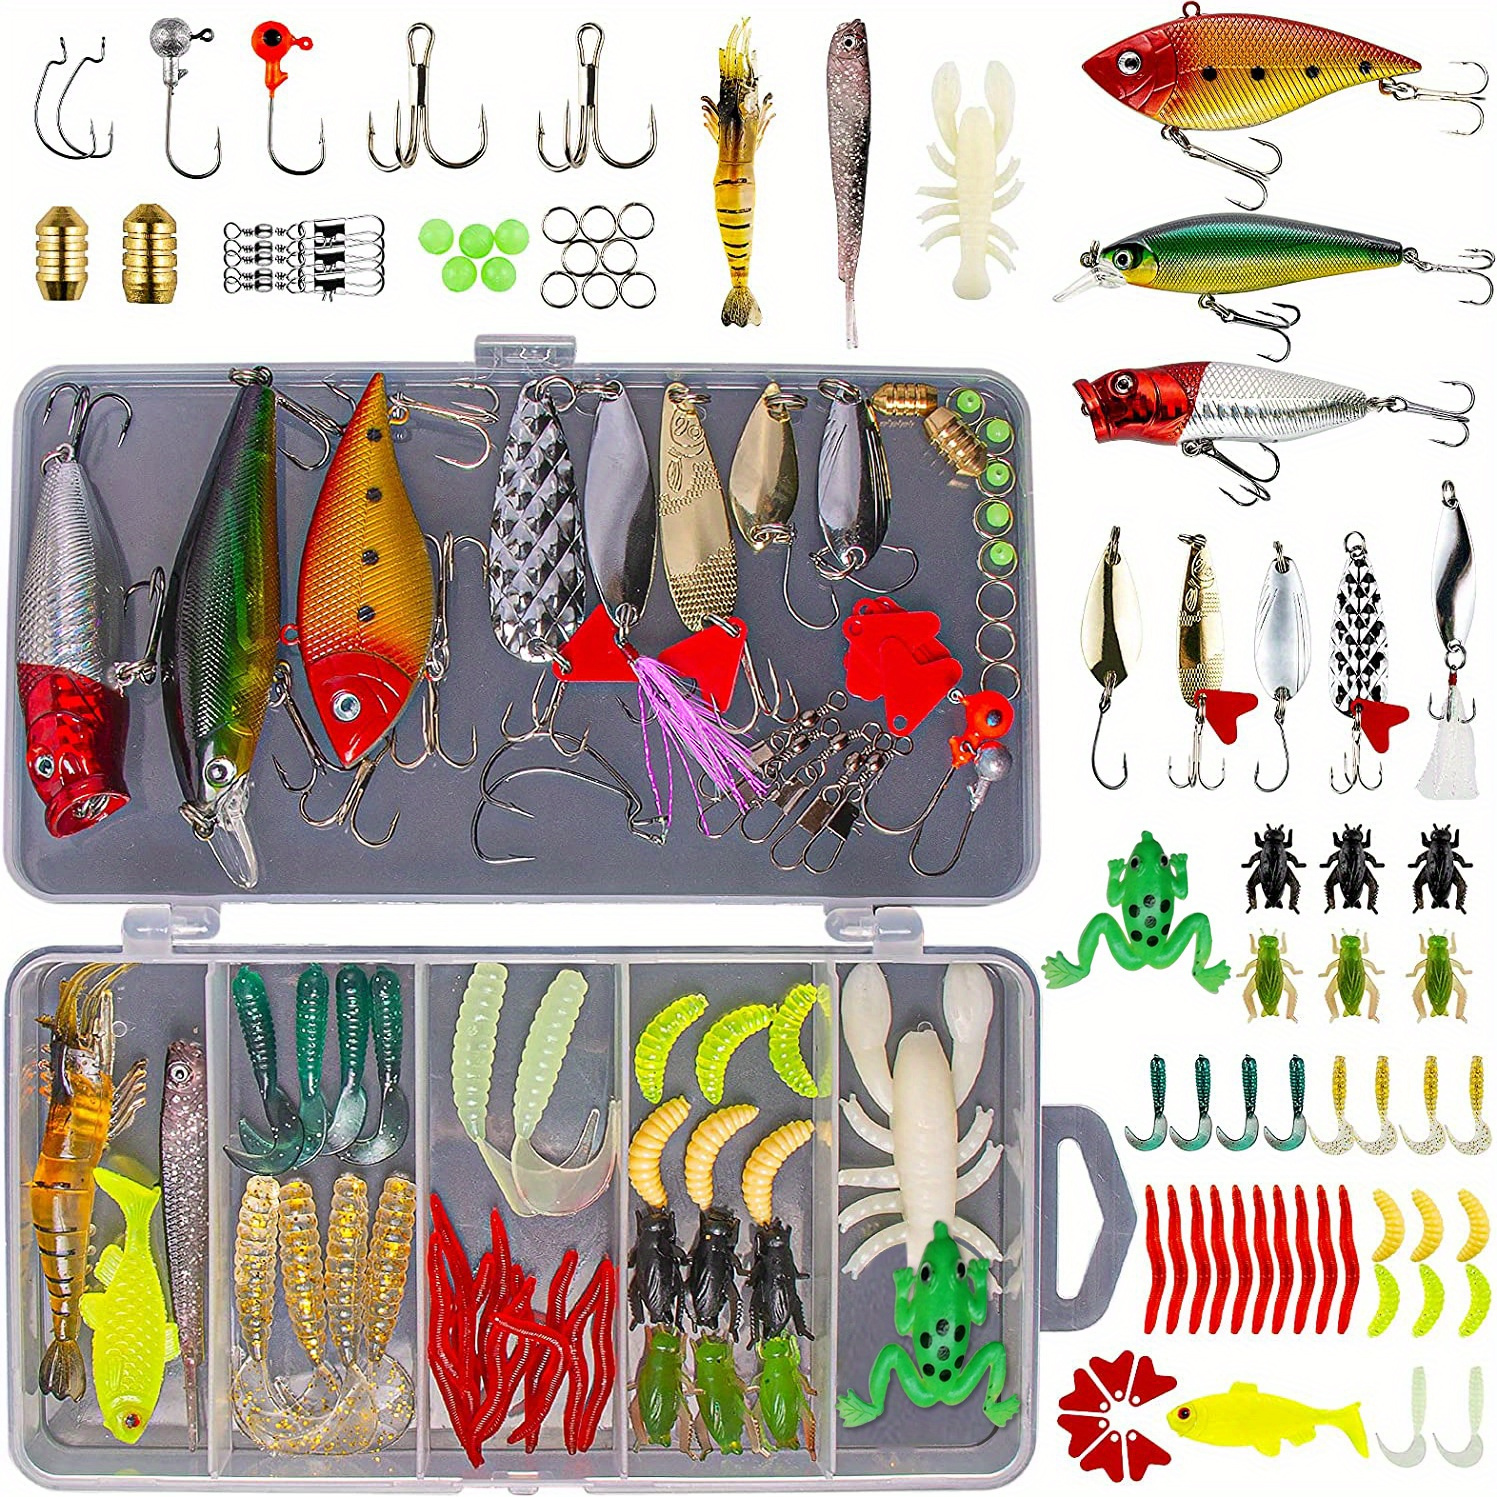 78pcs/set Fishing Tackle Set, Hard Bait And Soft Lure, Minnow Lure, Spoon,  Hooks, Fishing Accessories For Freshwater